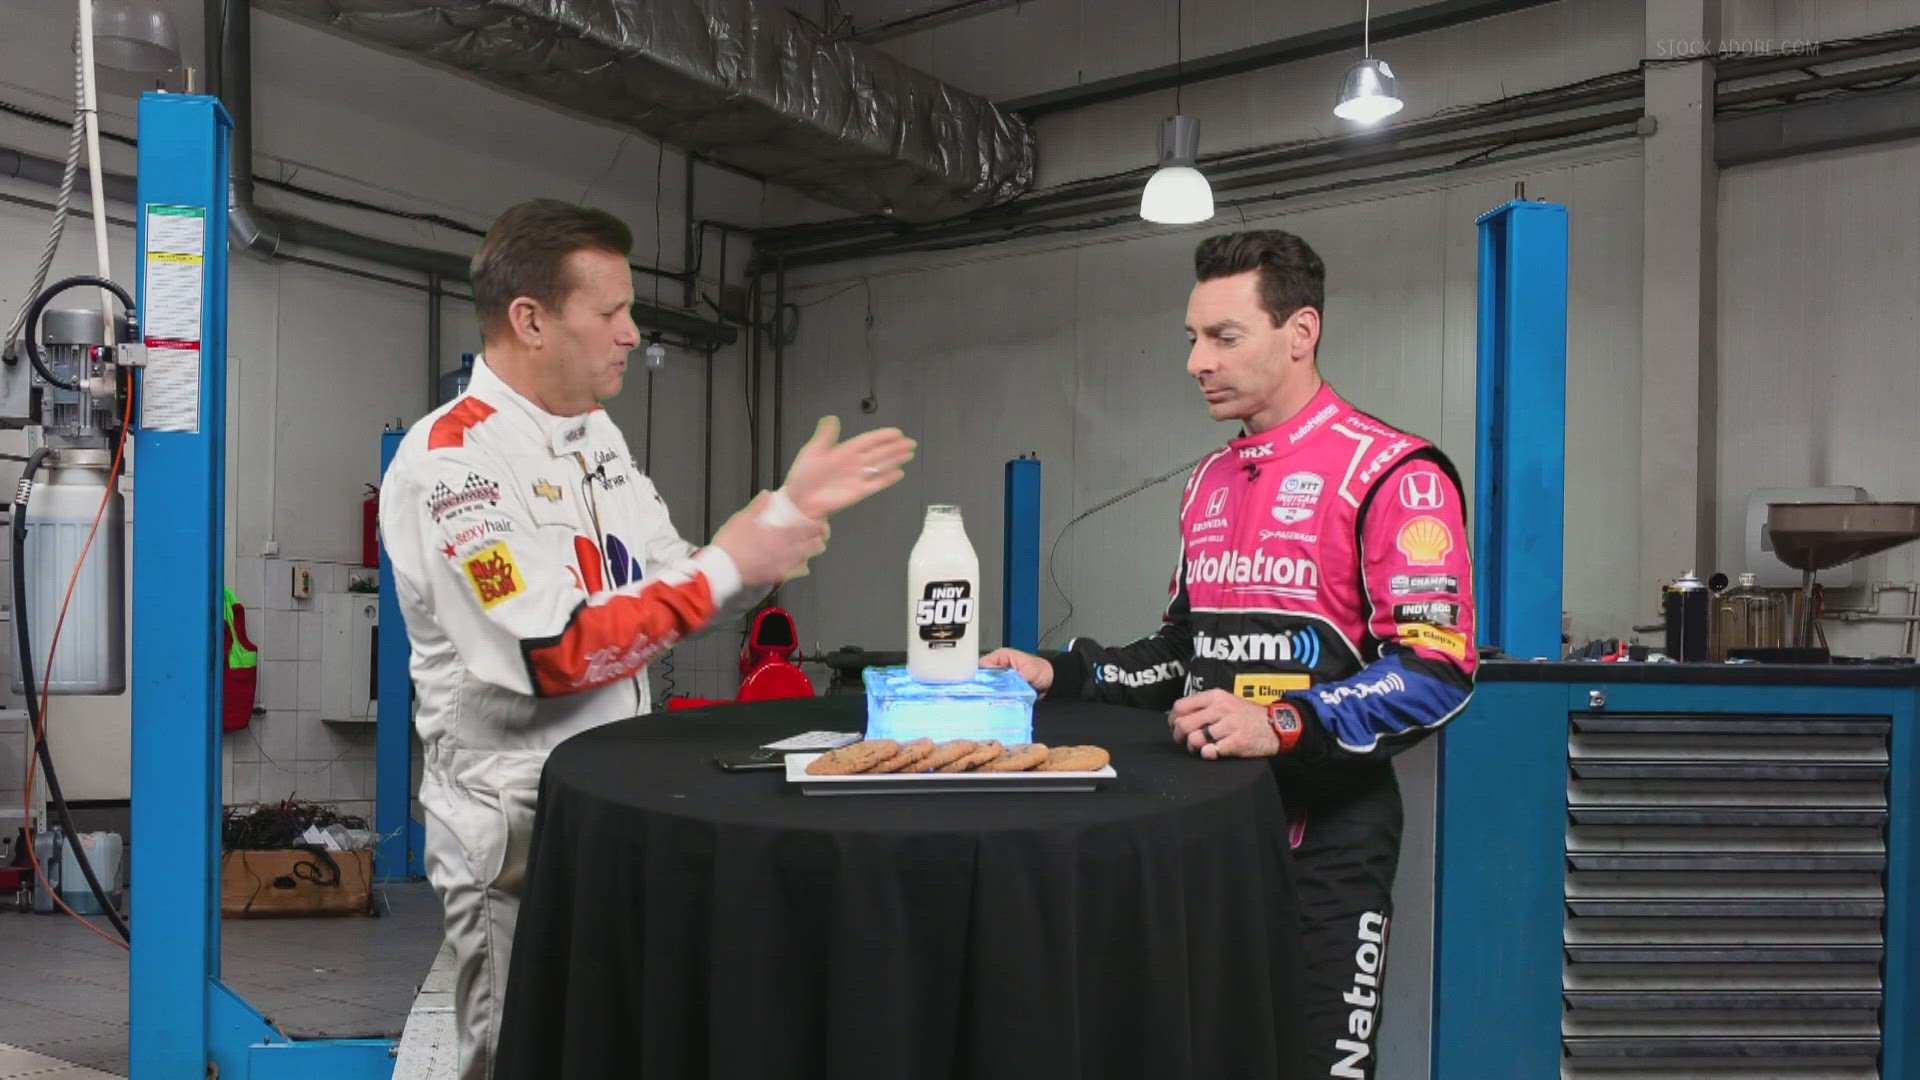 Dave Calabro asks IndyCar drivers the hard hitting questions over a glass of milk and plate of cookies!